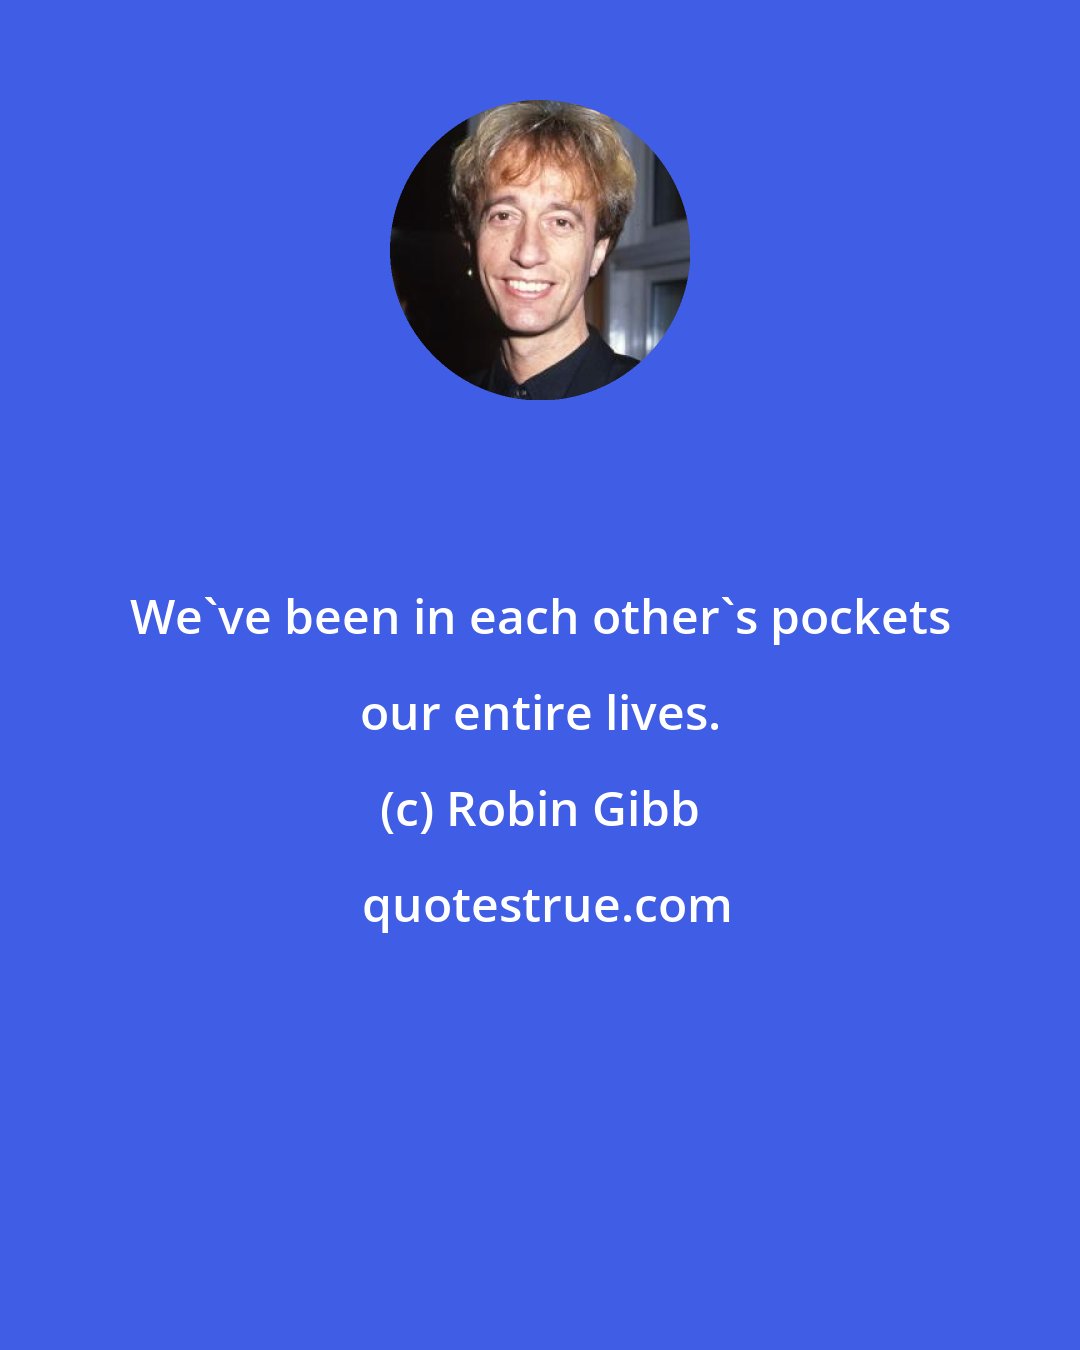 Robin Gibb: We've been in each other's pockets our entire lives.